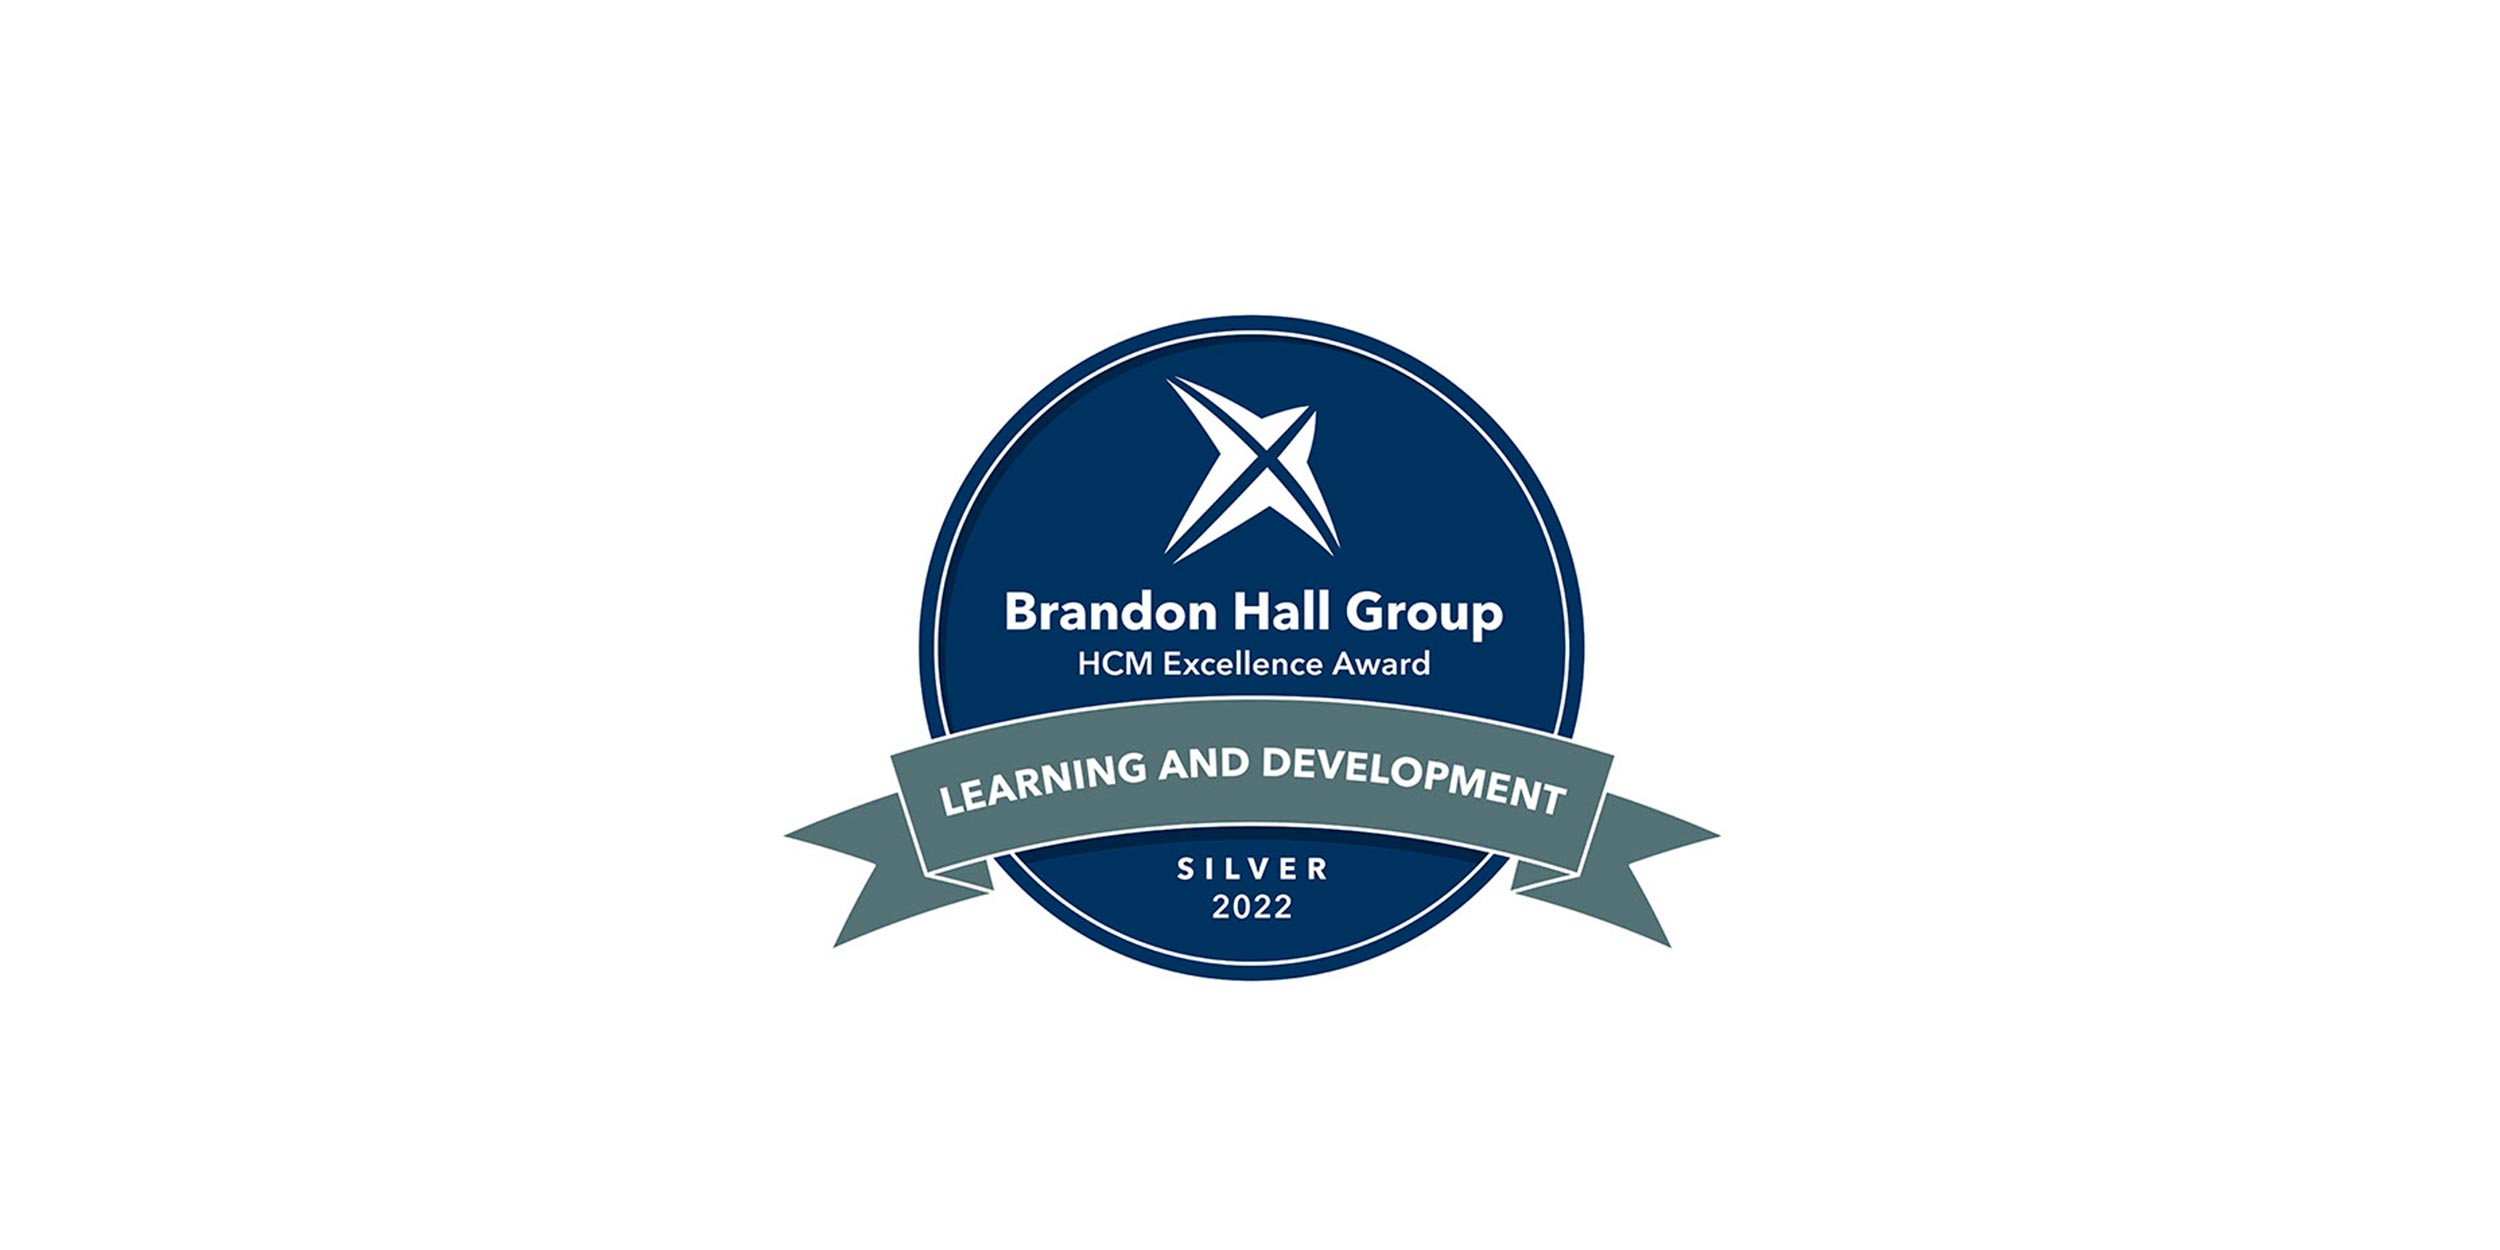 Invesco QQQ Wins Silver Brandon Hall Award With LEO Learning and